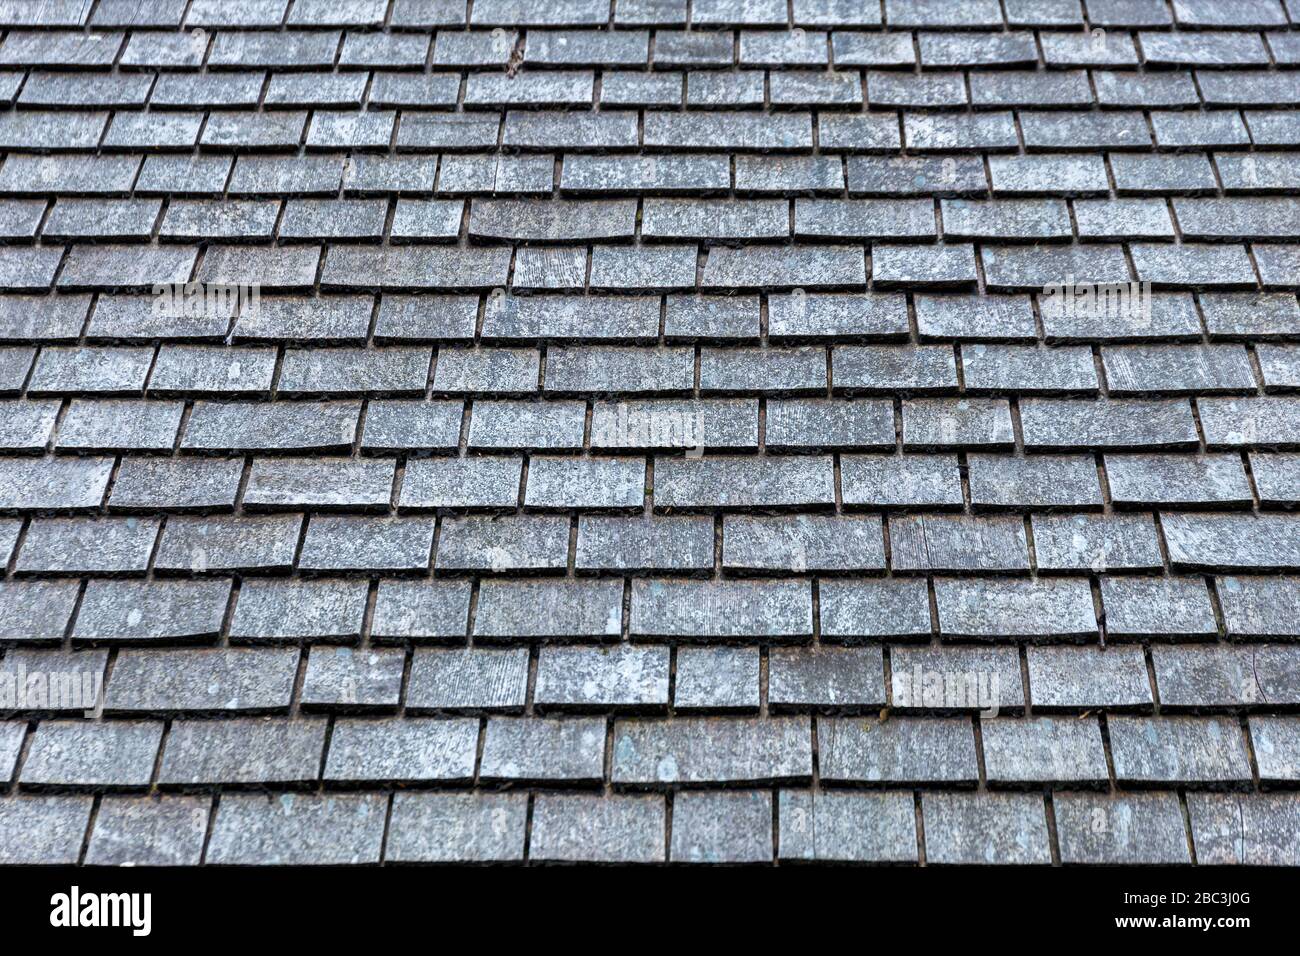 Grey slate roof tiles texture background image Stock Photo